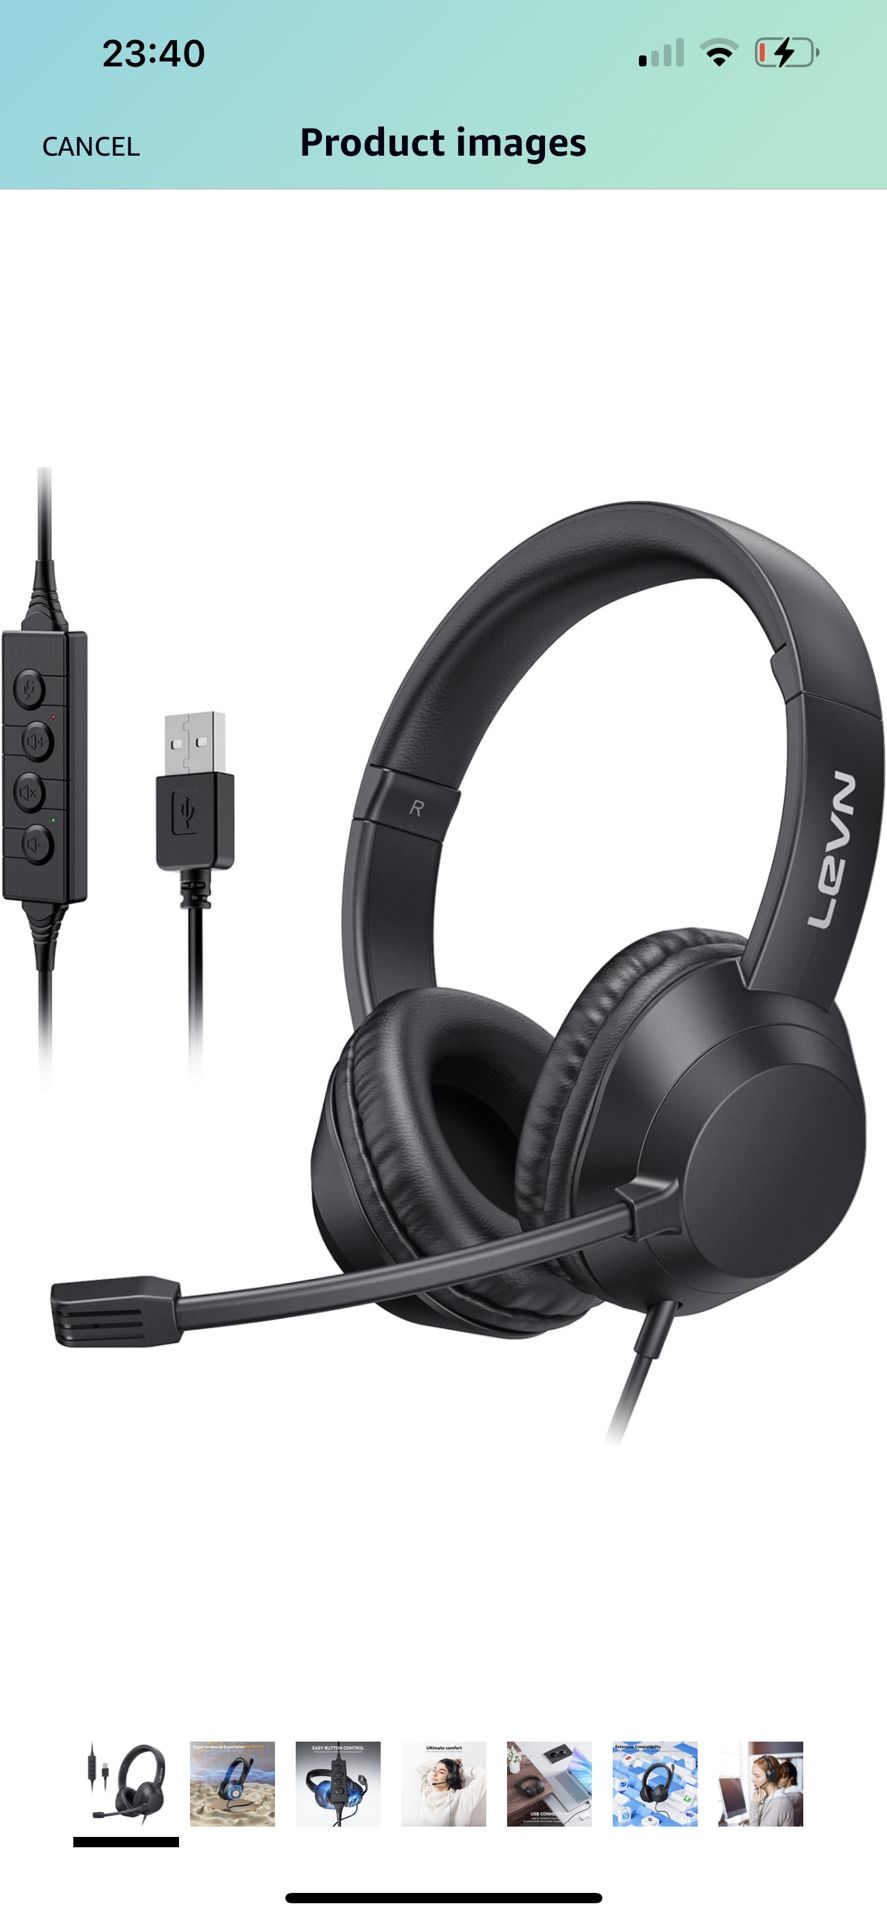 Brand New Headset with Mic, USB Headset with Microphone, Computer Headset with Noise Cancelling Microphone for Laptop PC, Mute in-line Controls, Wired